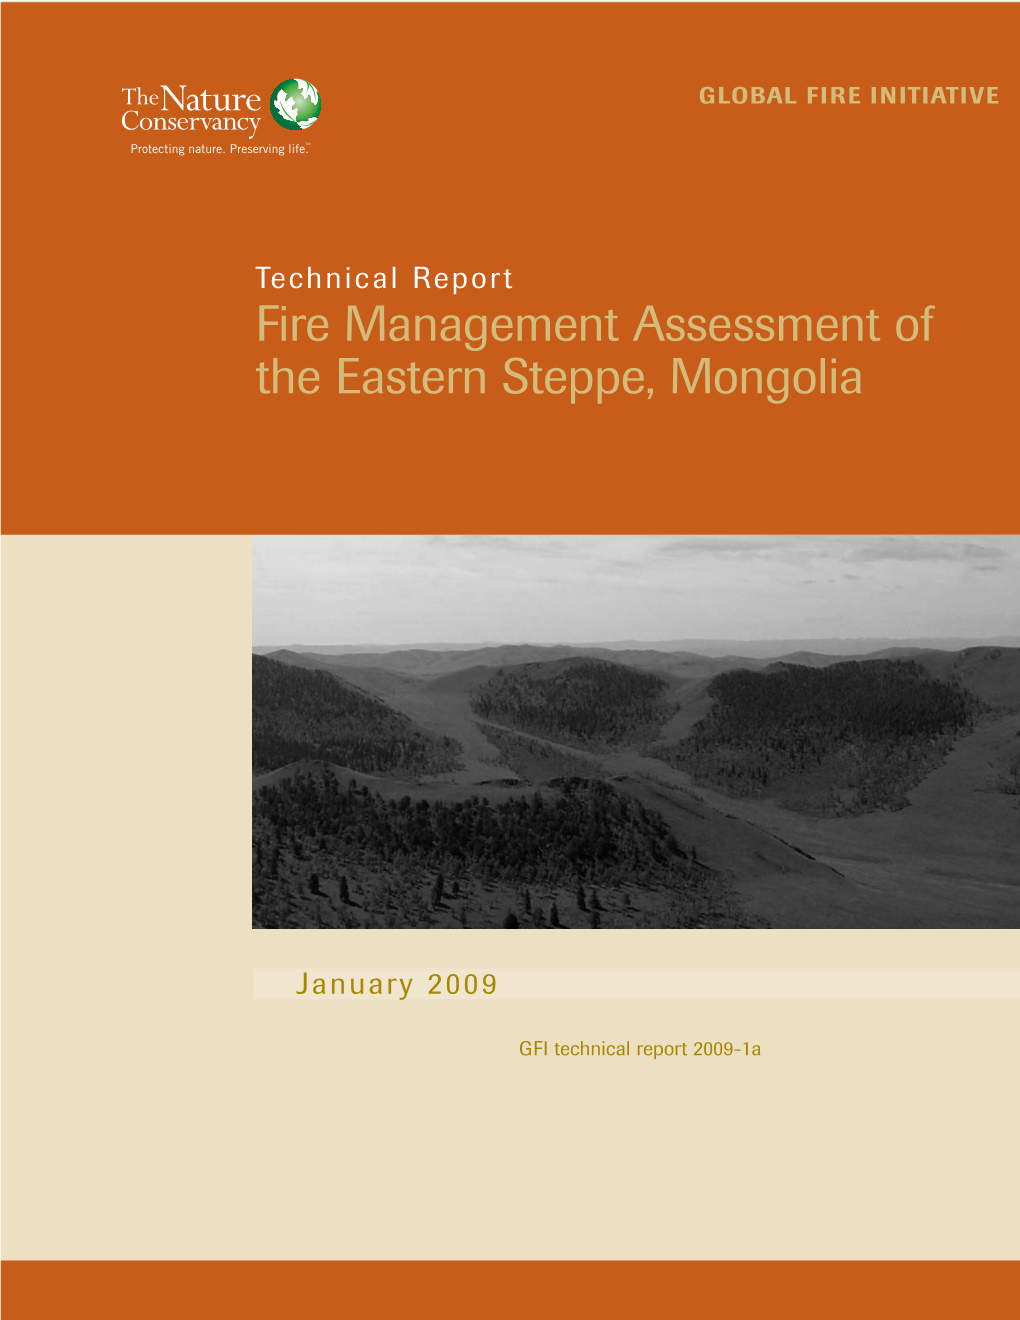 Fire Management Assessment of the Eastern Steppe, Mongolia